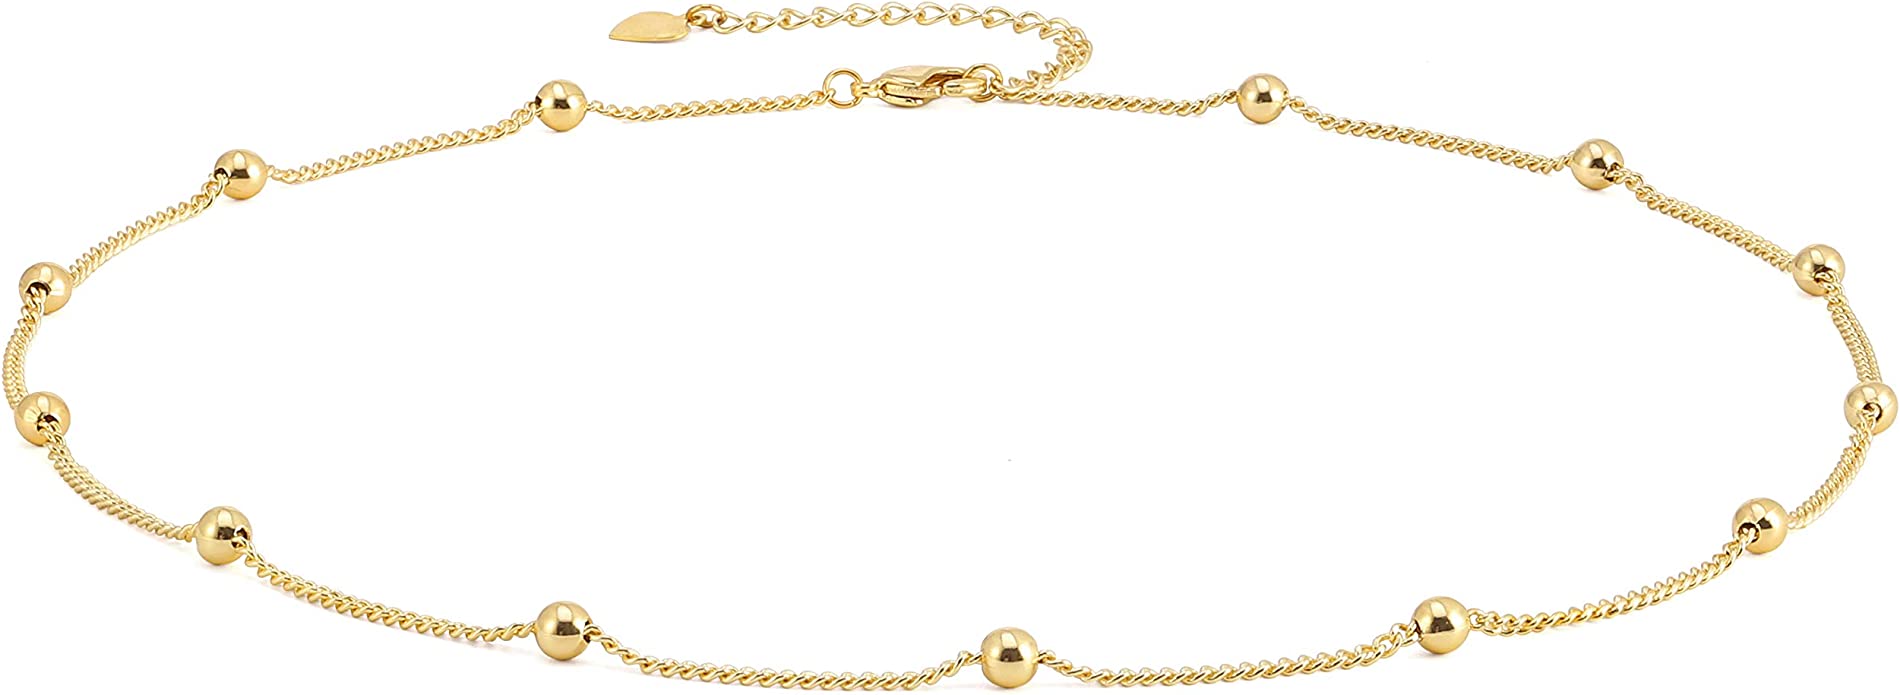 Aobei Pearl 18K Gold Chain Beaded Choker Necklace